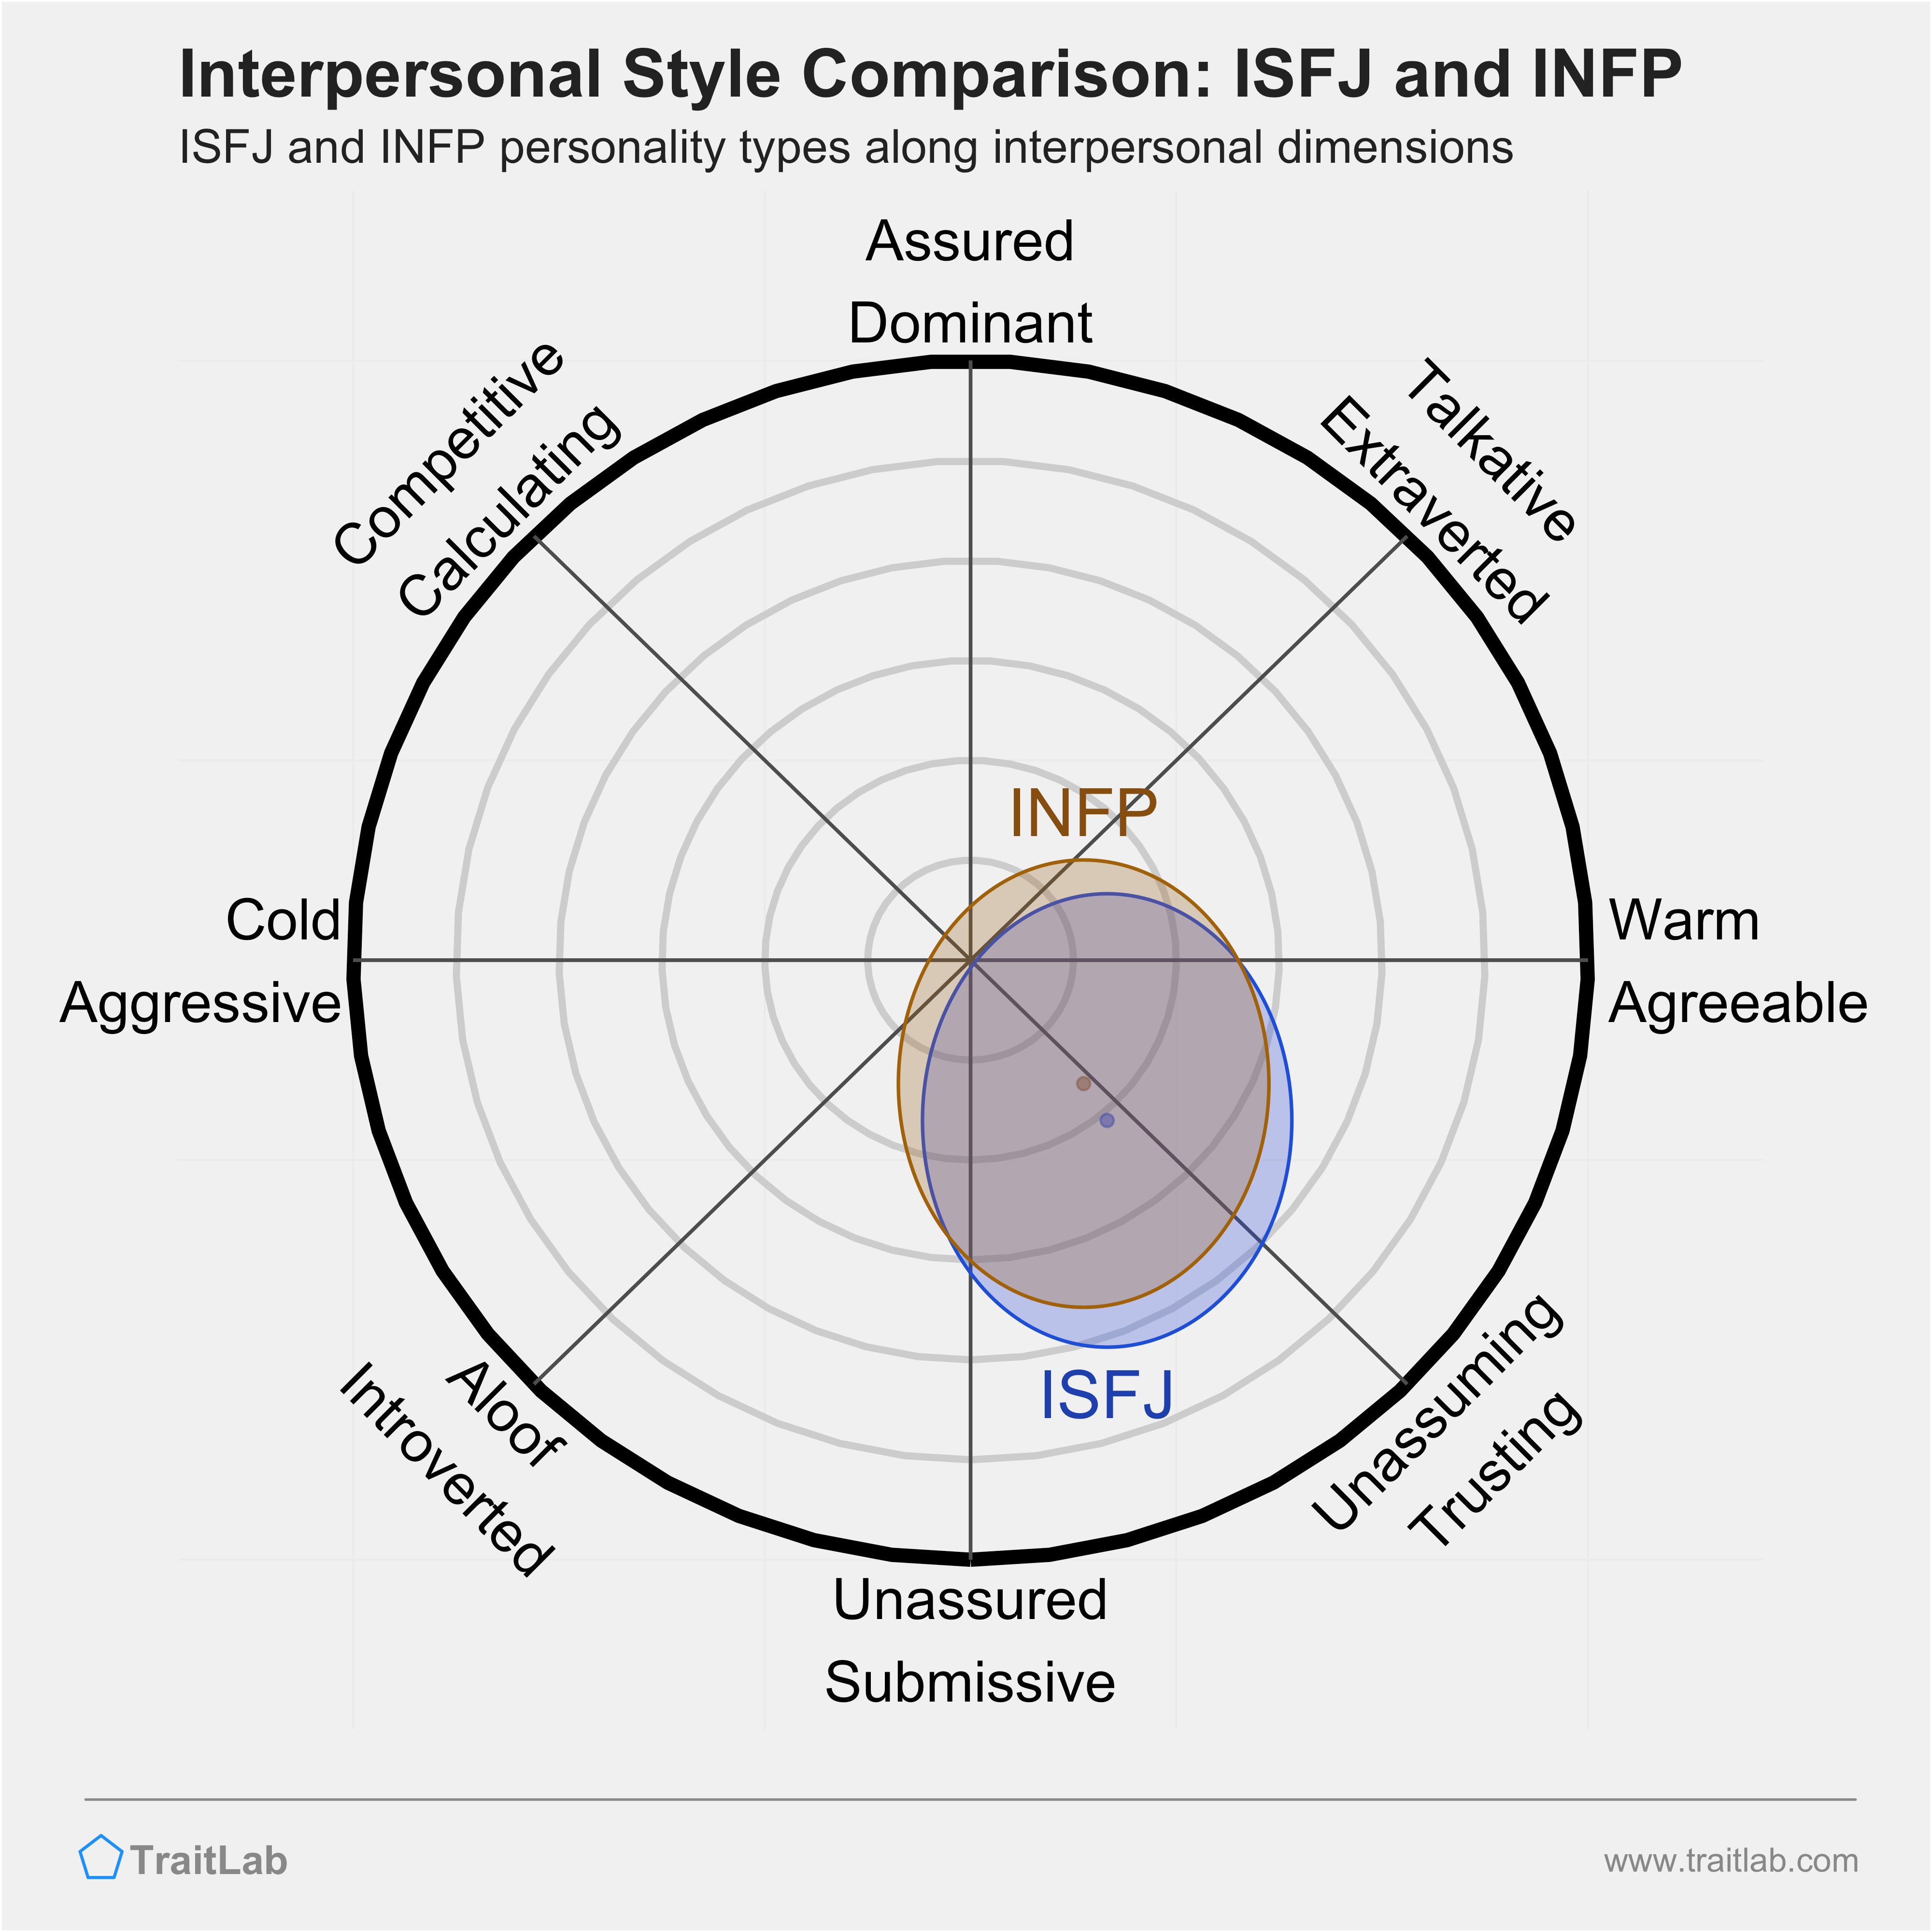 ISFJ and INFP comparison across interpersonal dimensions